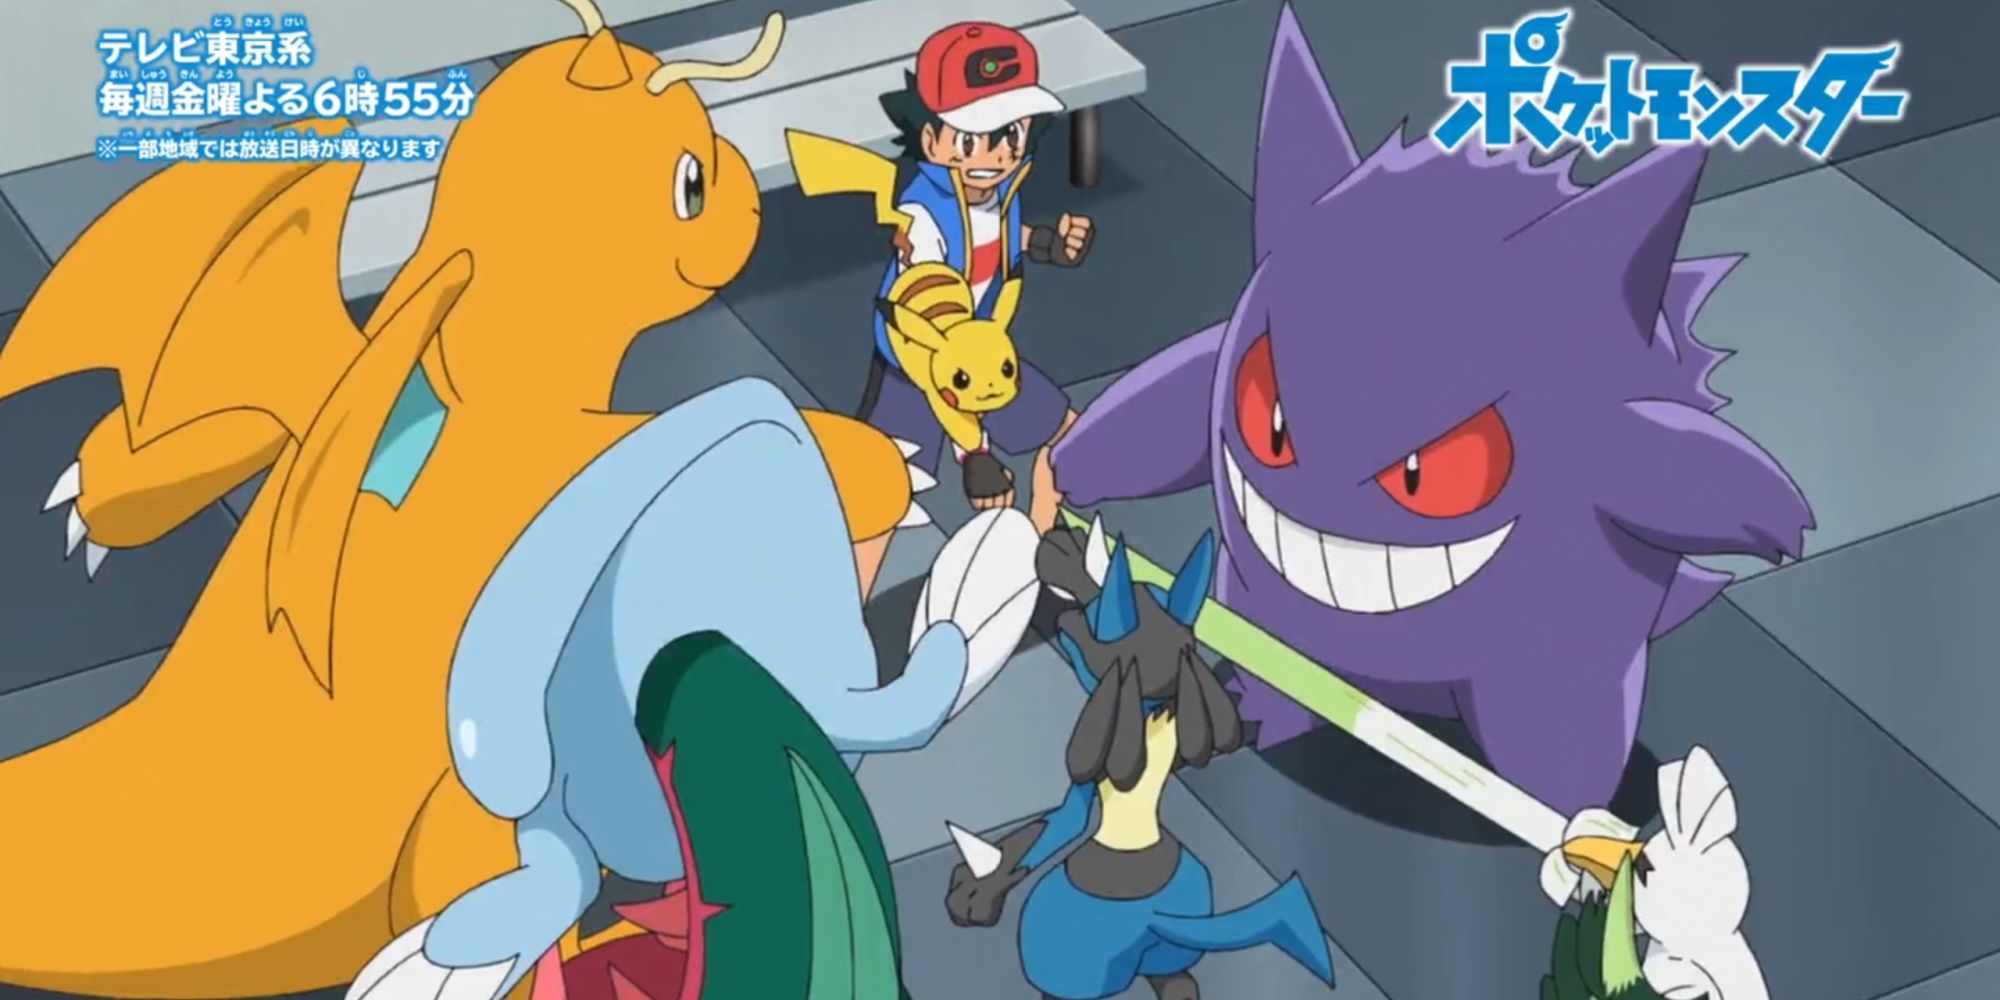 Ash's team from the final arc of the Pokémon Journeys anime is